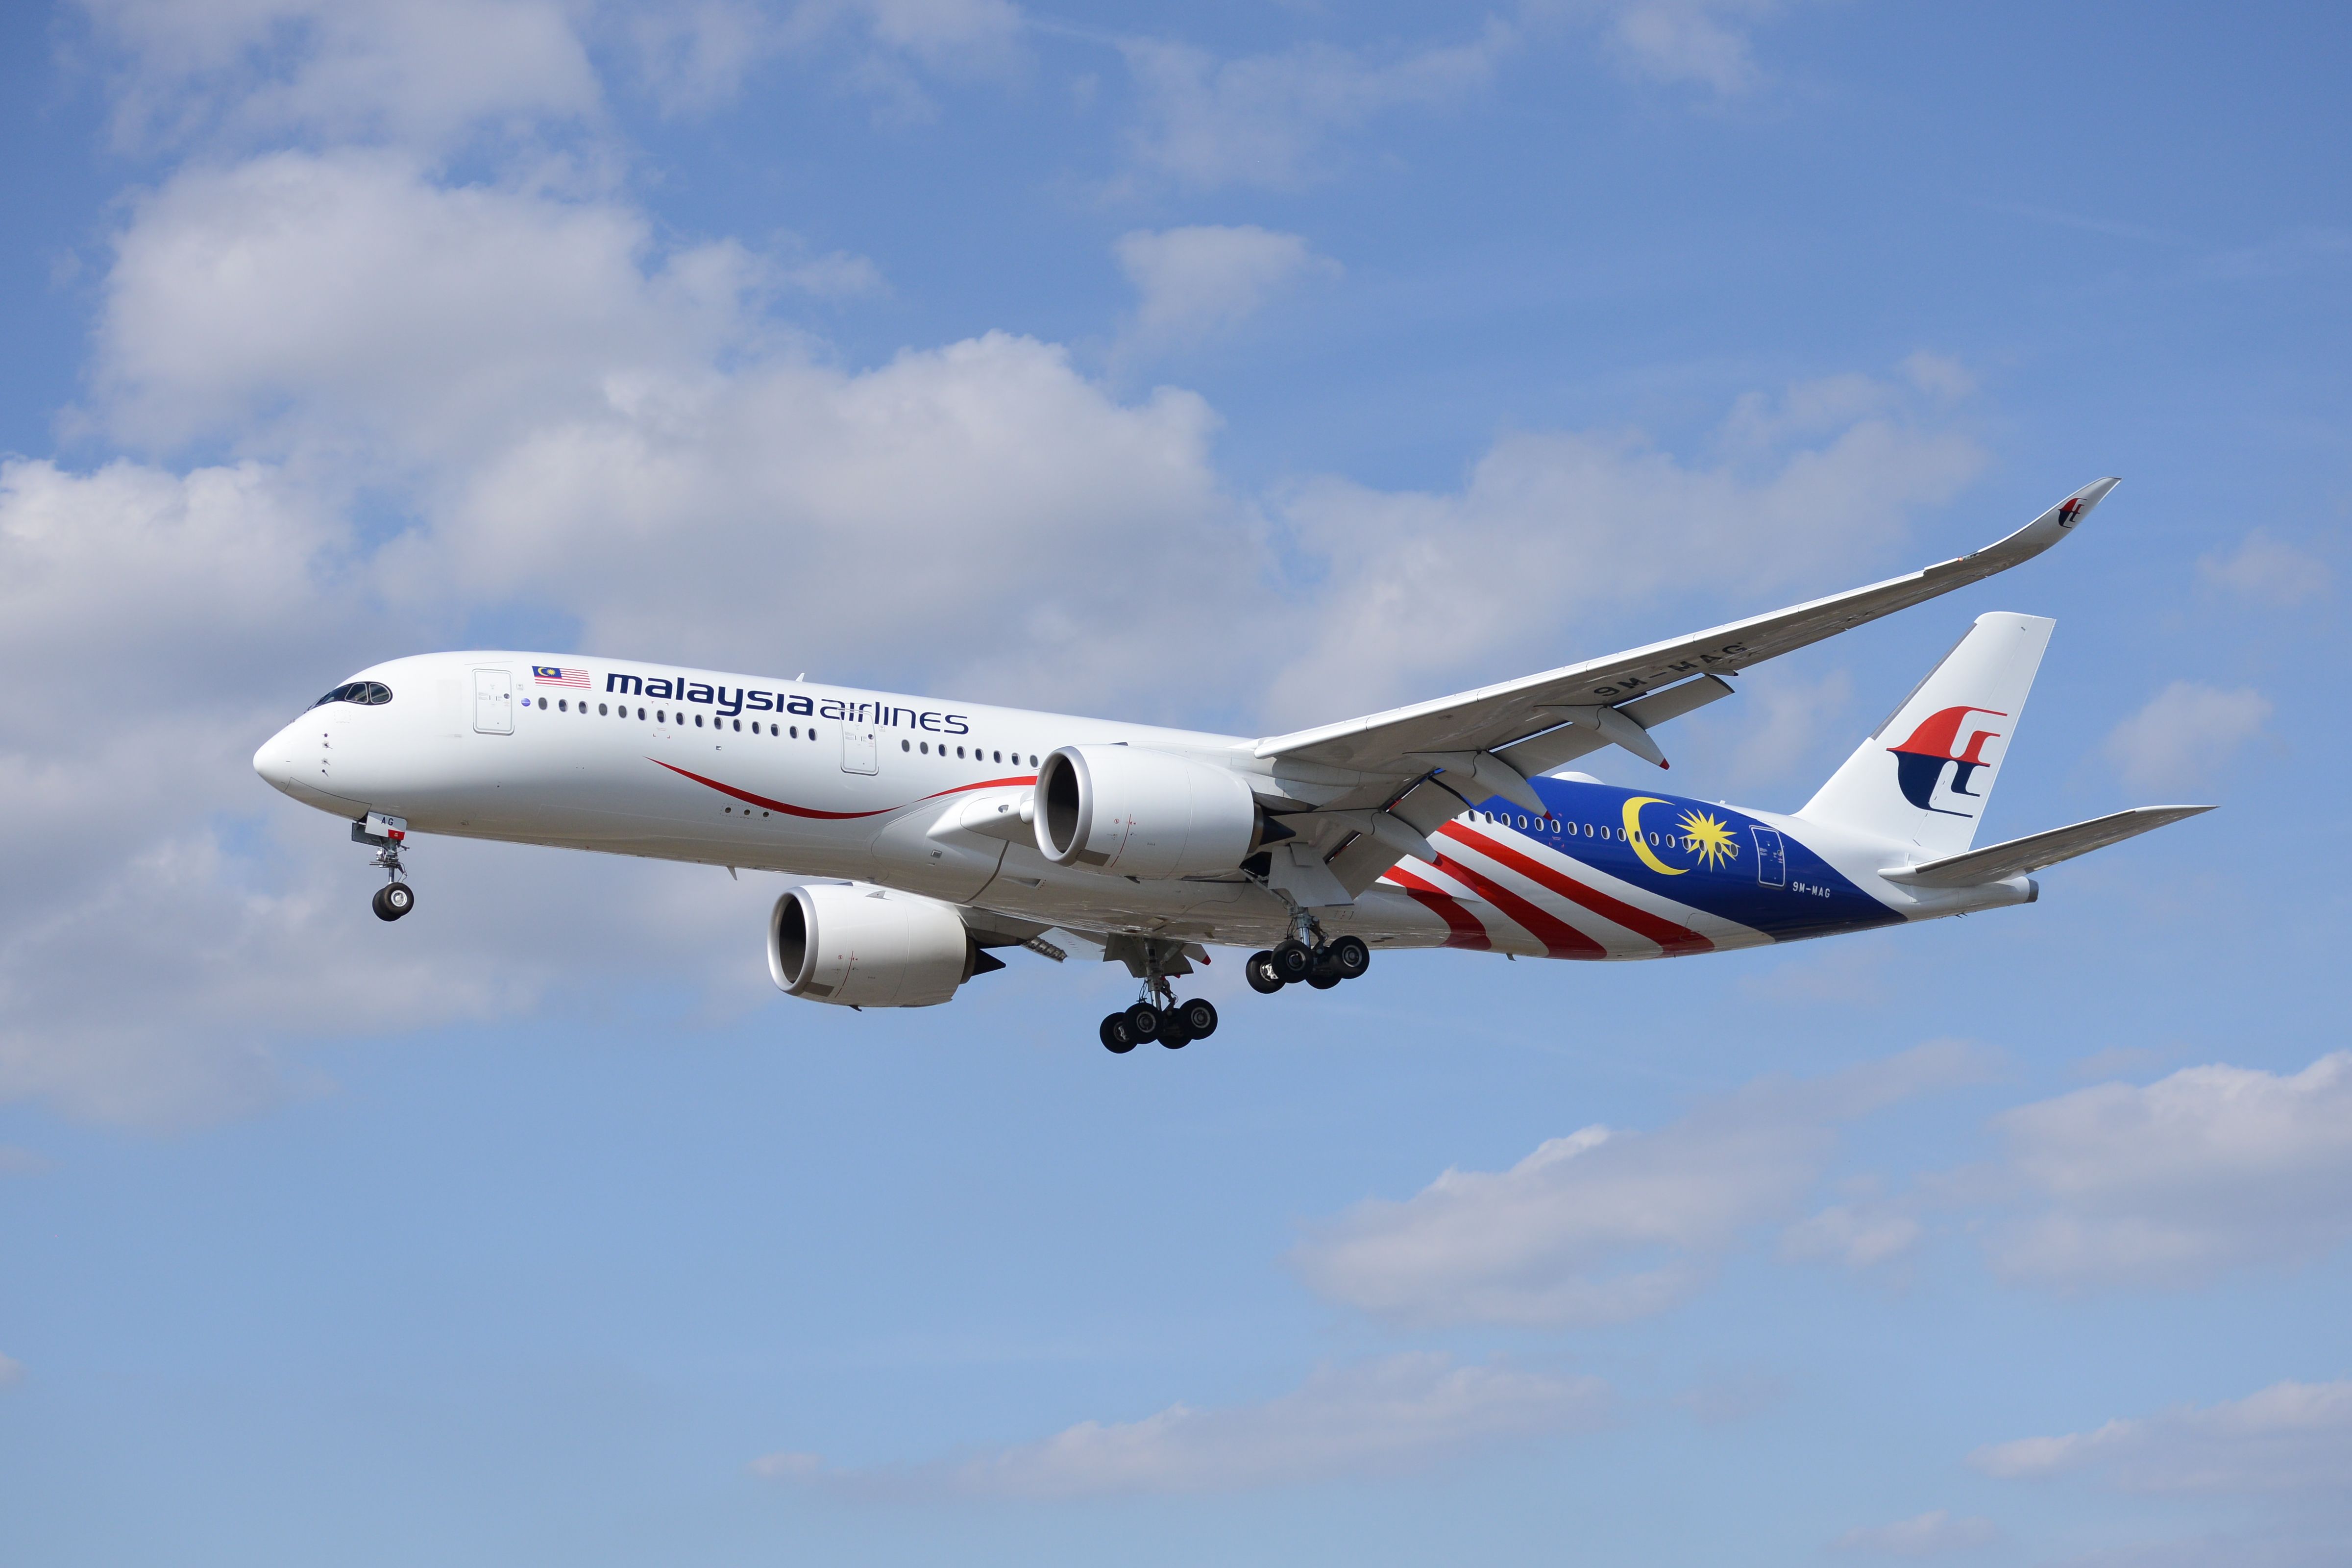 A Malaysia Airlines Airbus A350-900 flying in the sky.